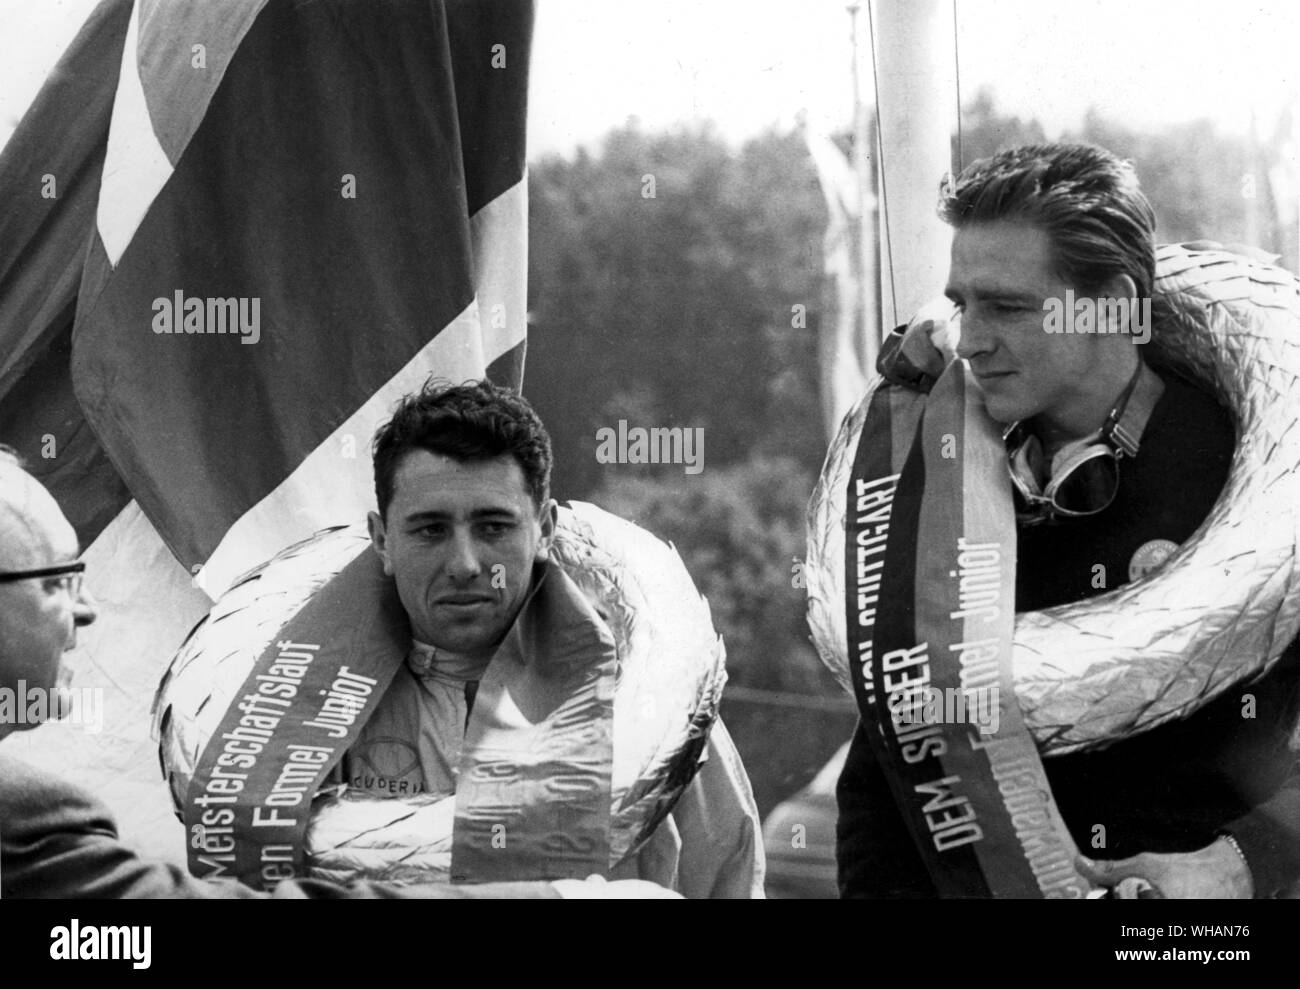 On the podium T Taylor and Mitler 1975 Stock Photo